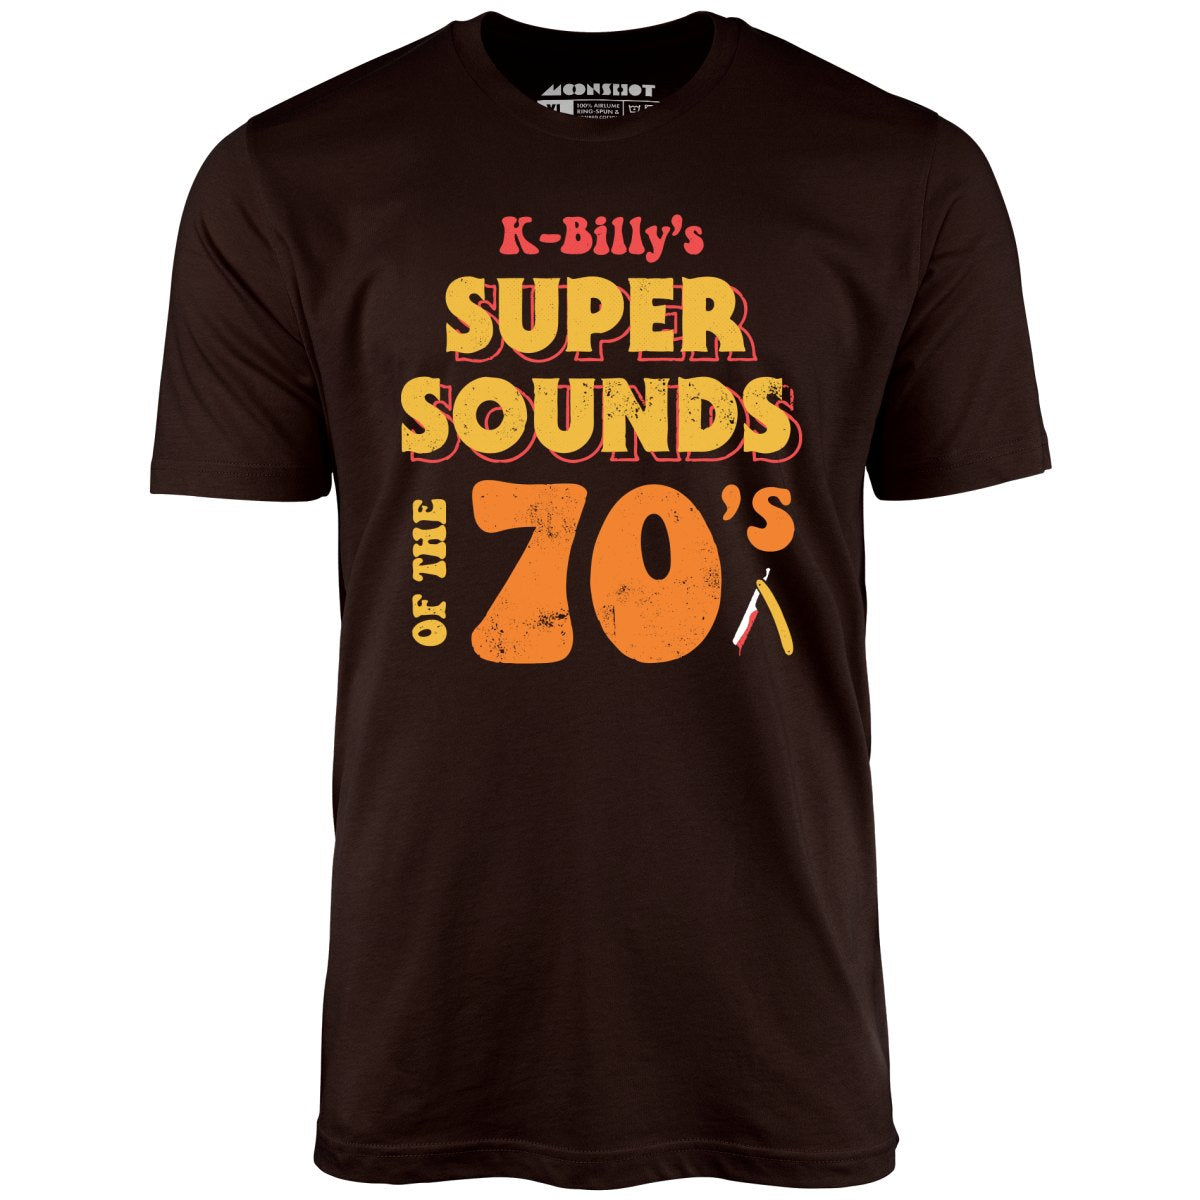 K-Billy's Super Sounds of the 70s - Unisex T-Shirt